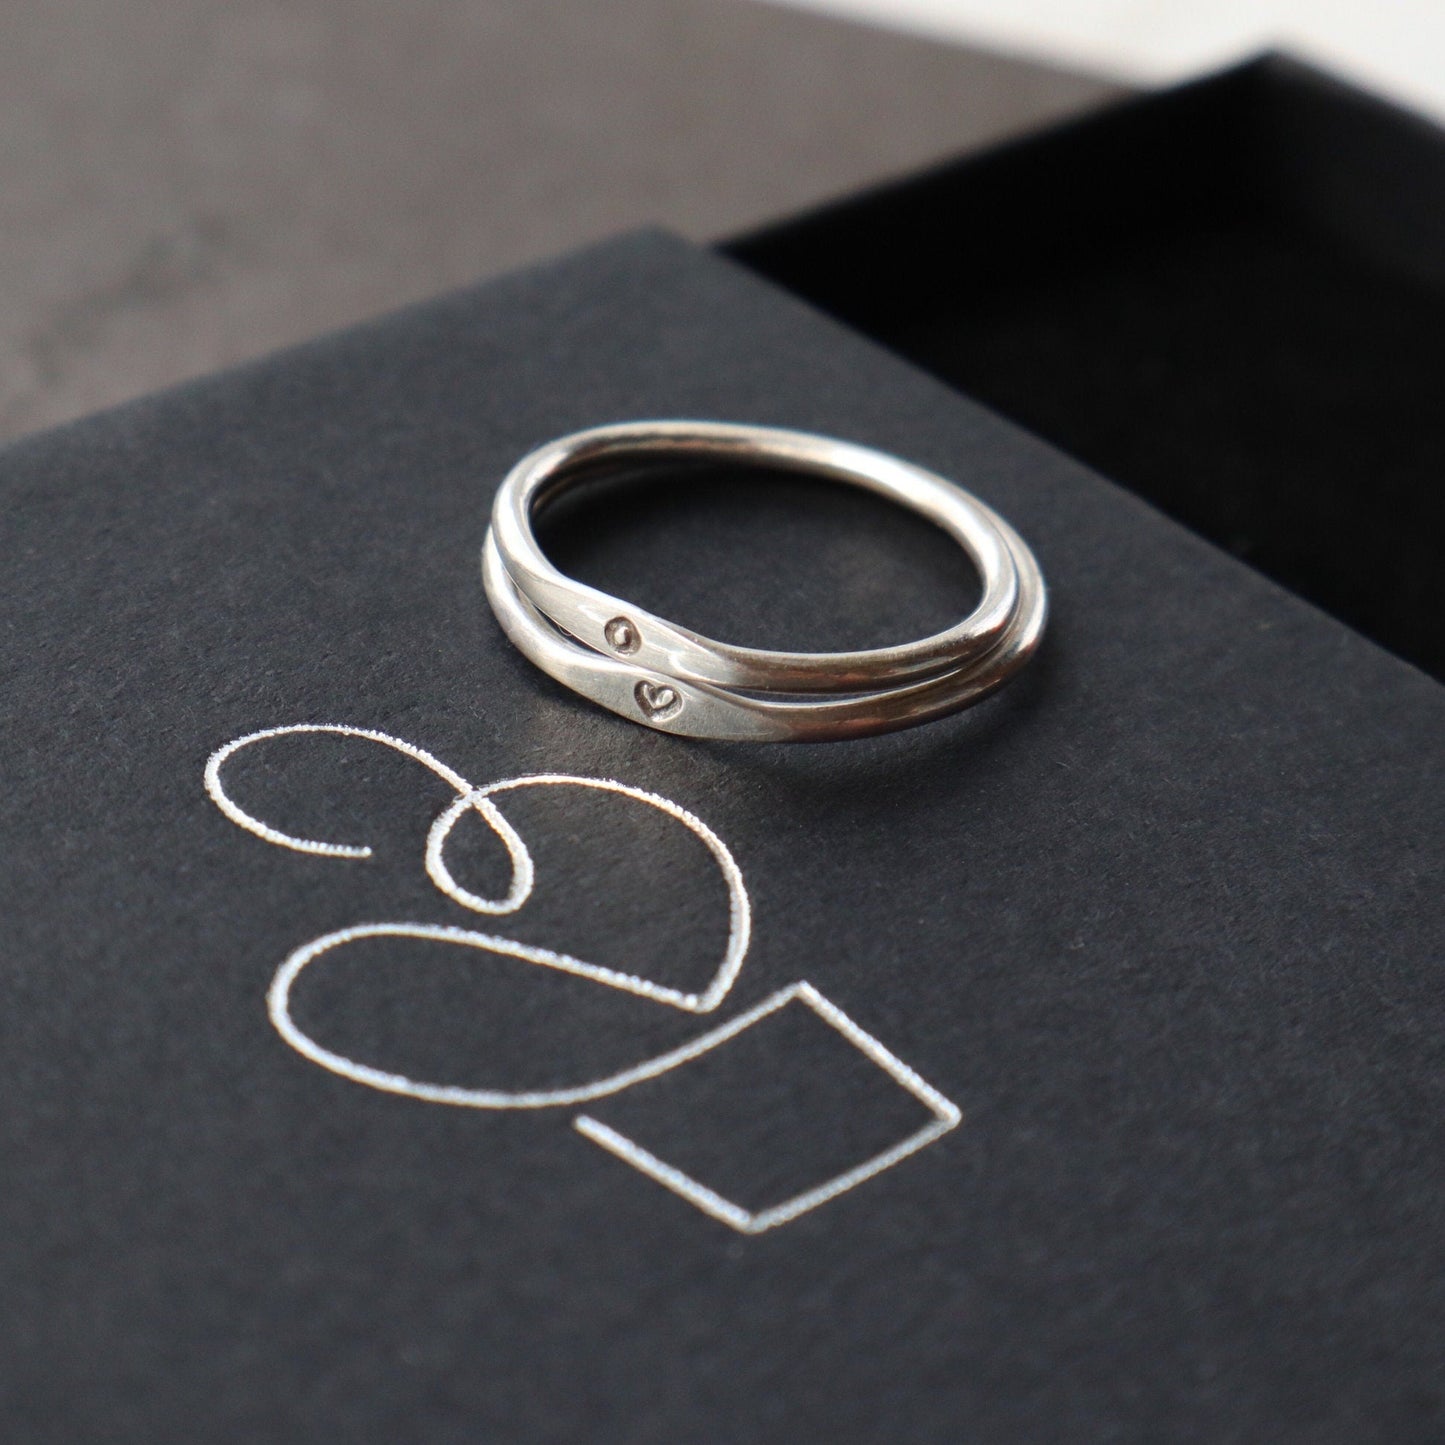 Mini Signet Rings, Letter ring and a heart ring.